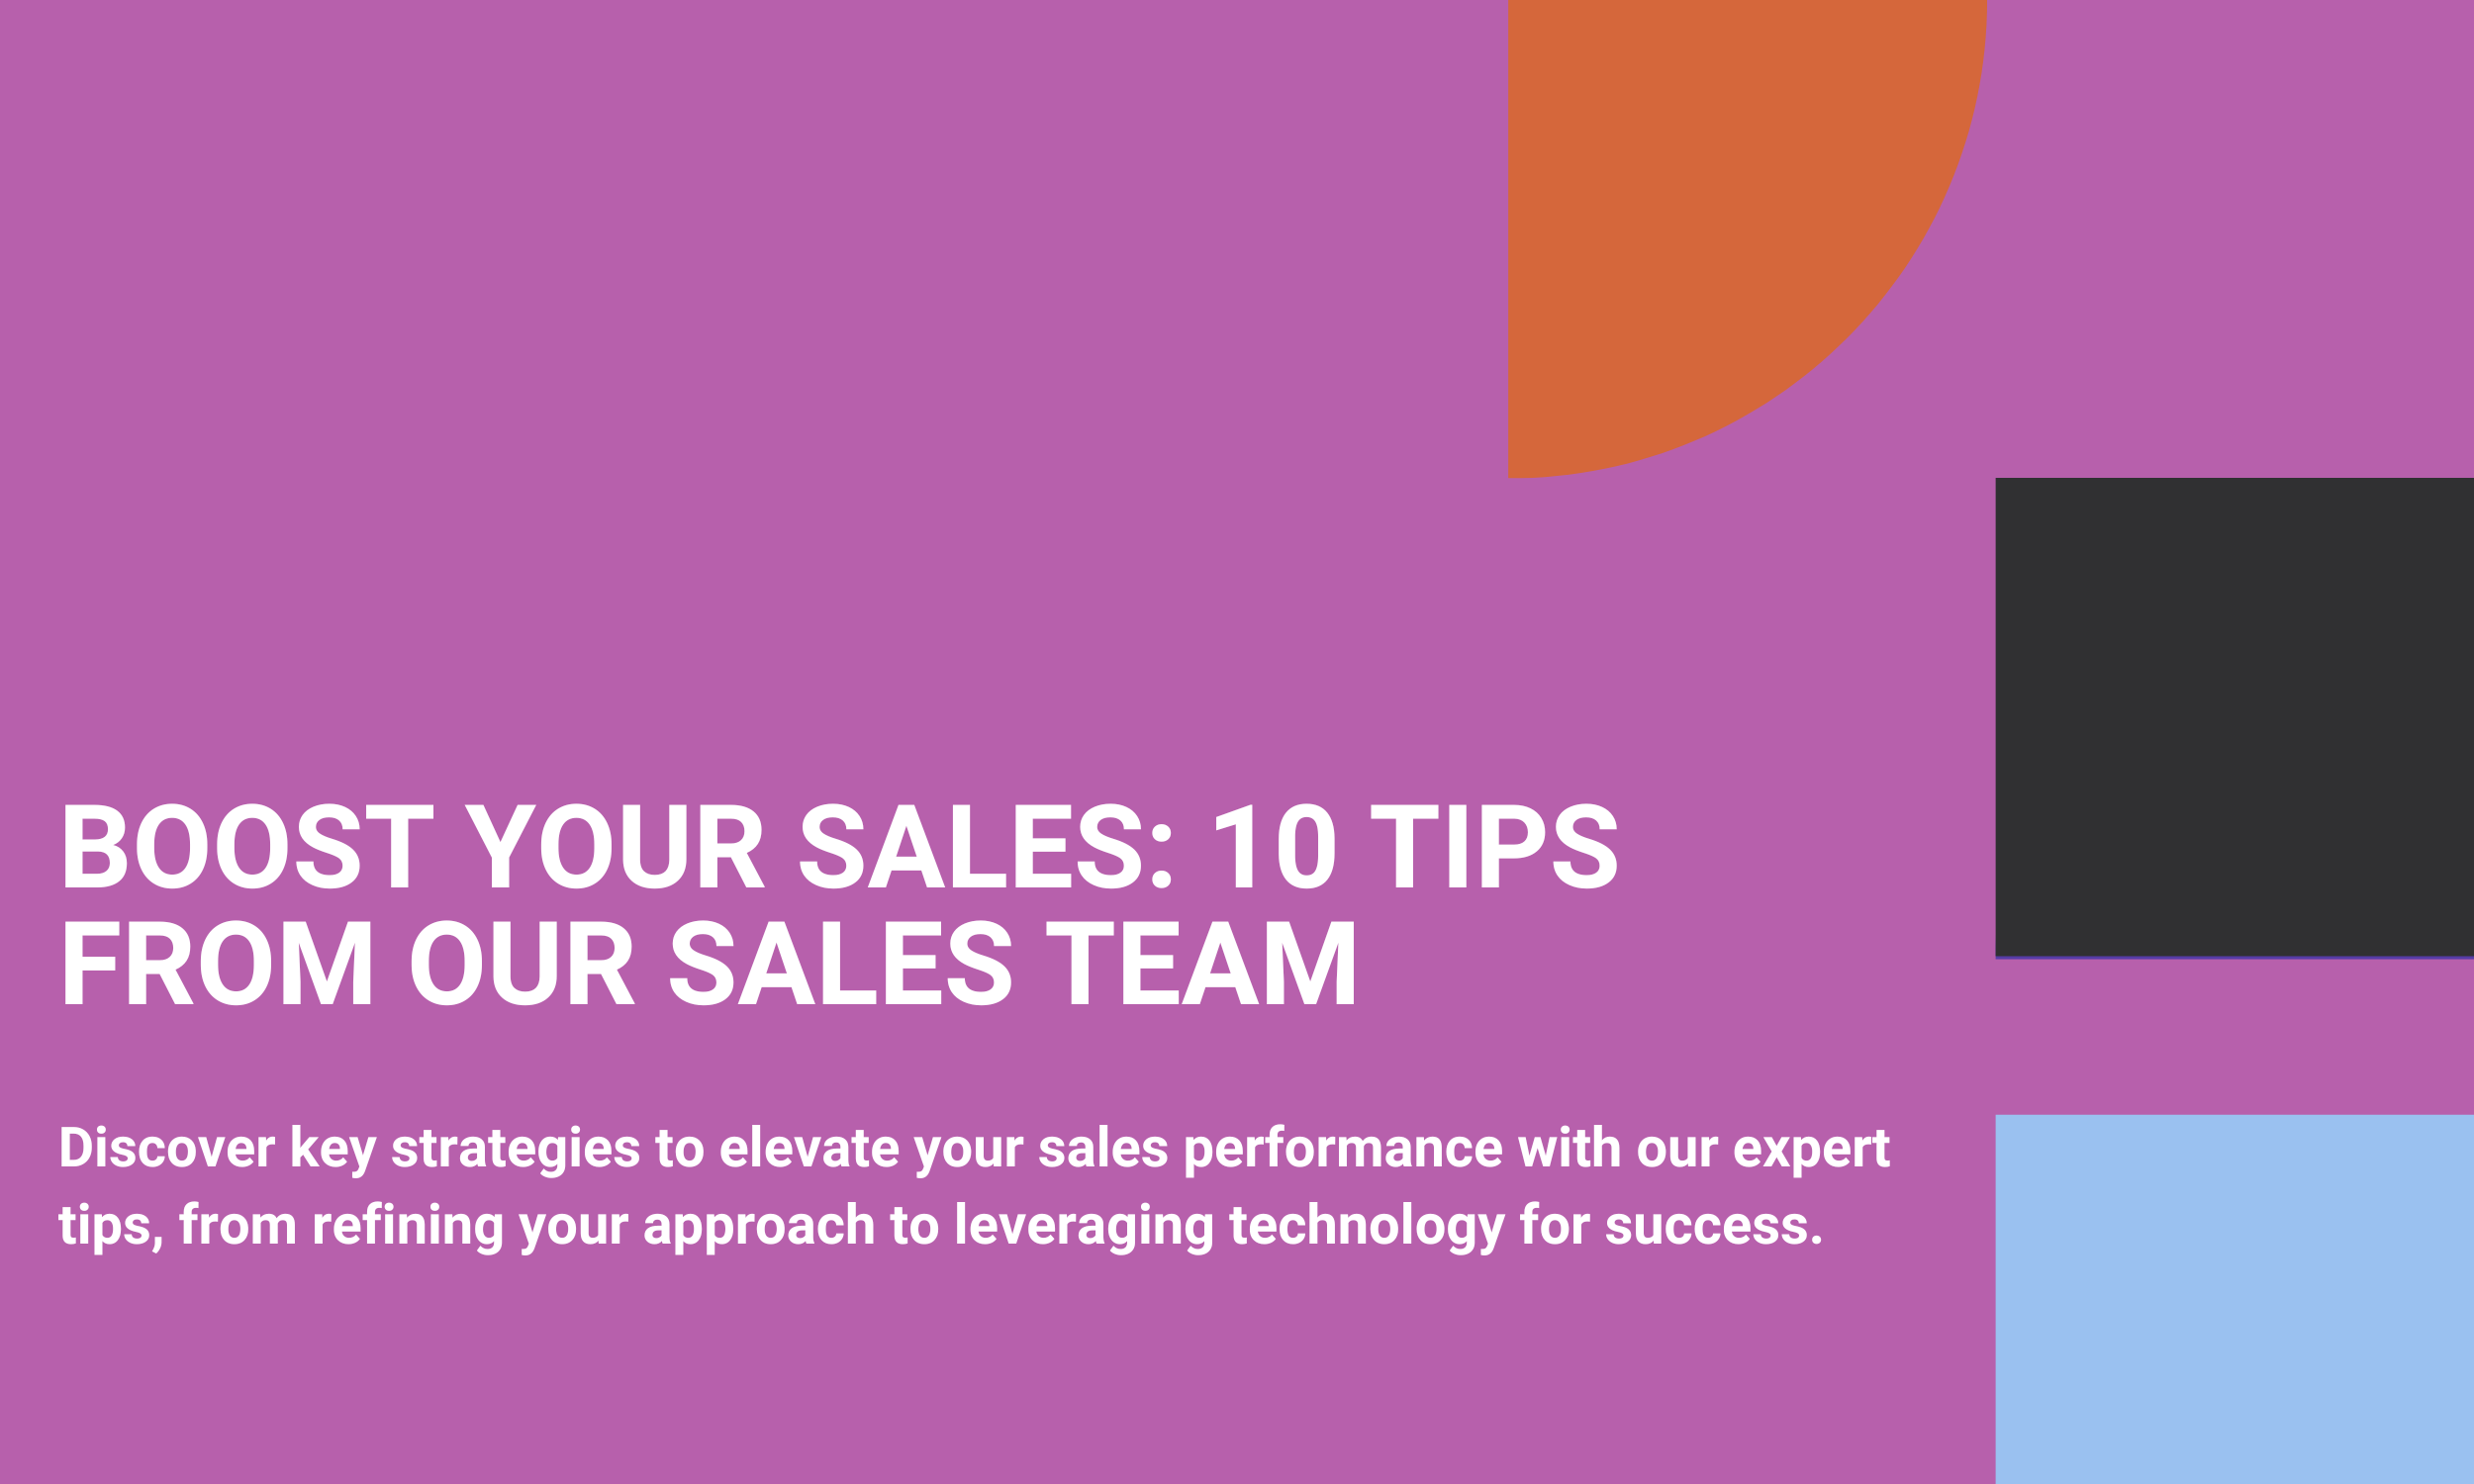 Boost Your Sales: 10 Tips From Our Sales Team